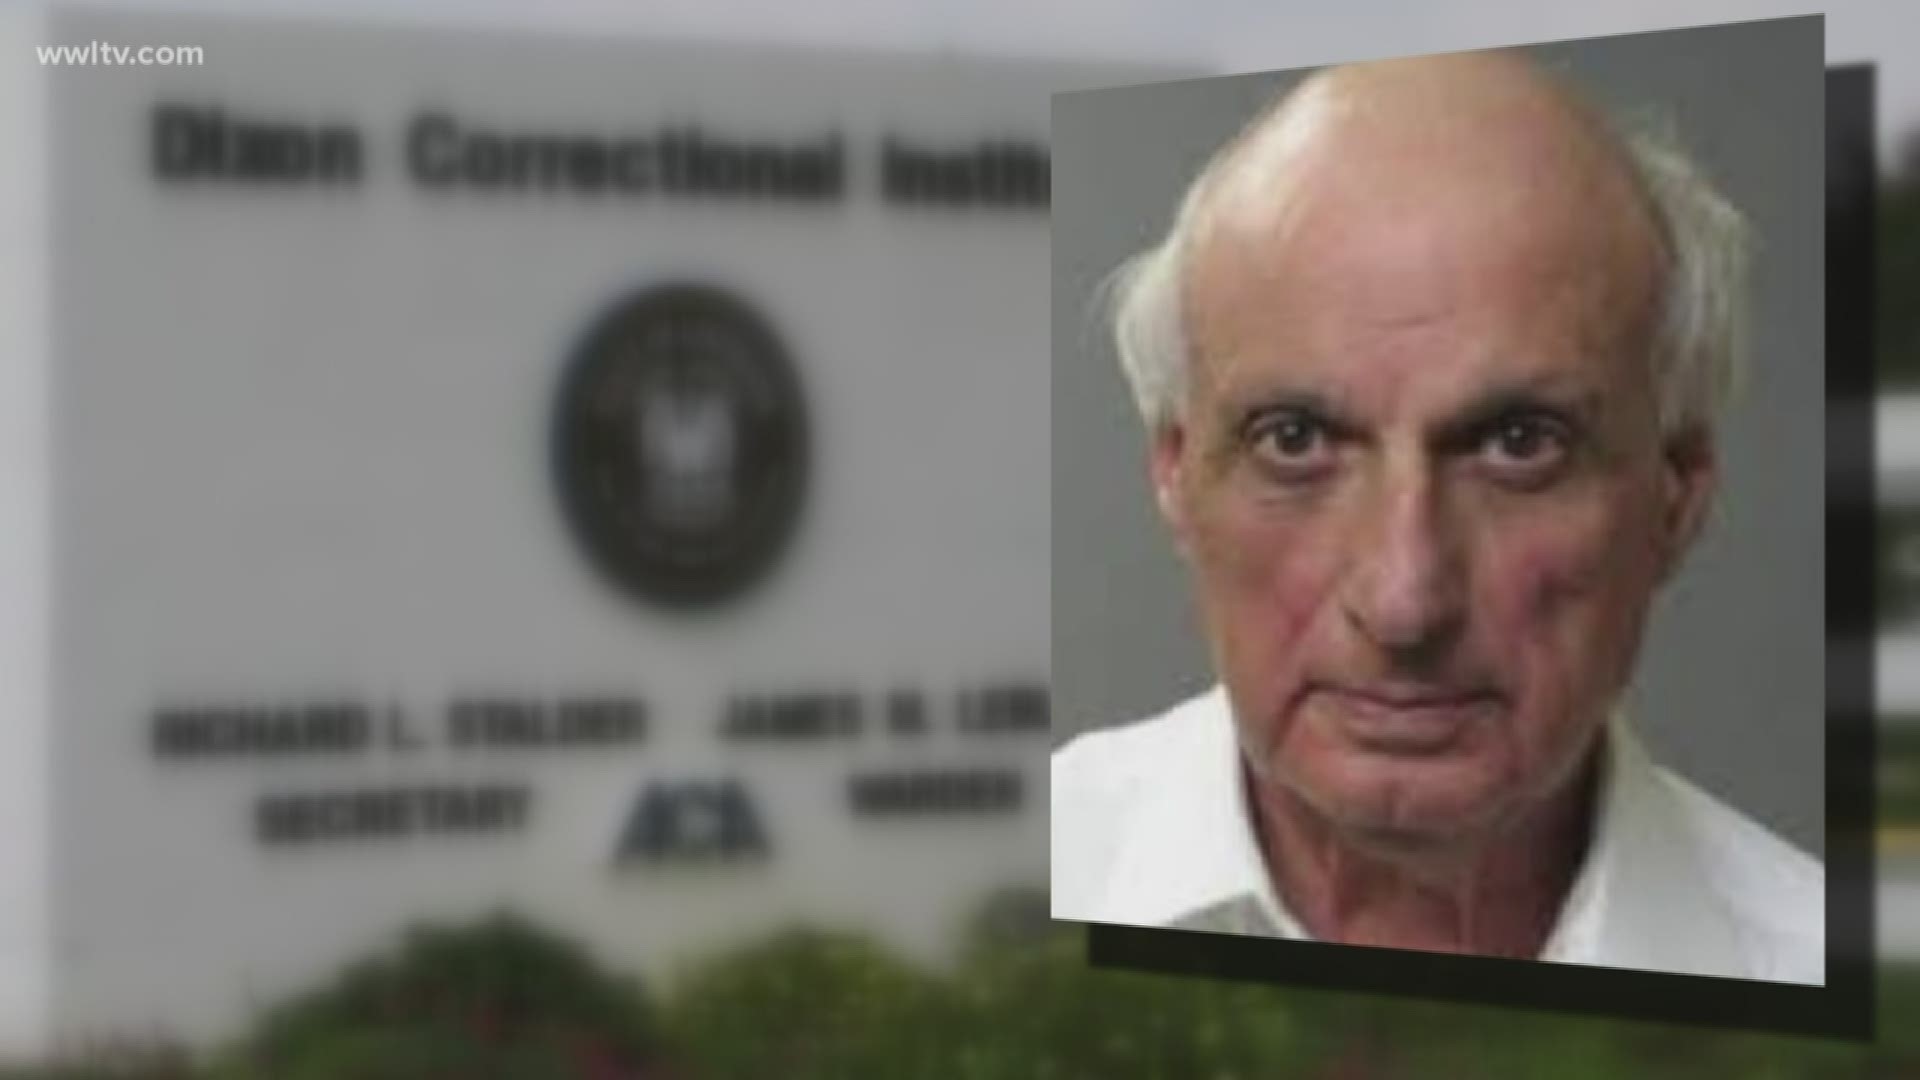 Vince Marinello, former New Orleans sportscaster jailed for murdering wife, dies in prison